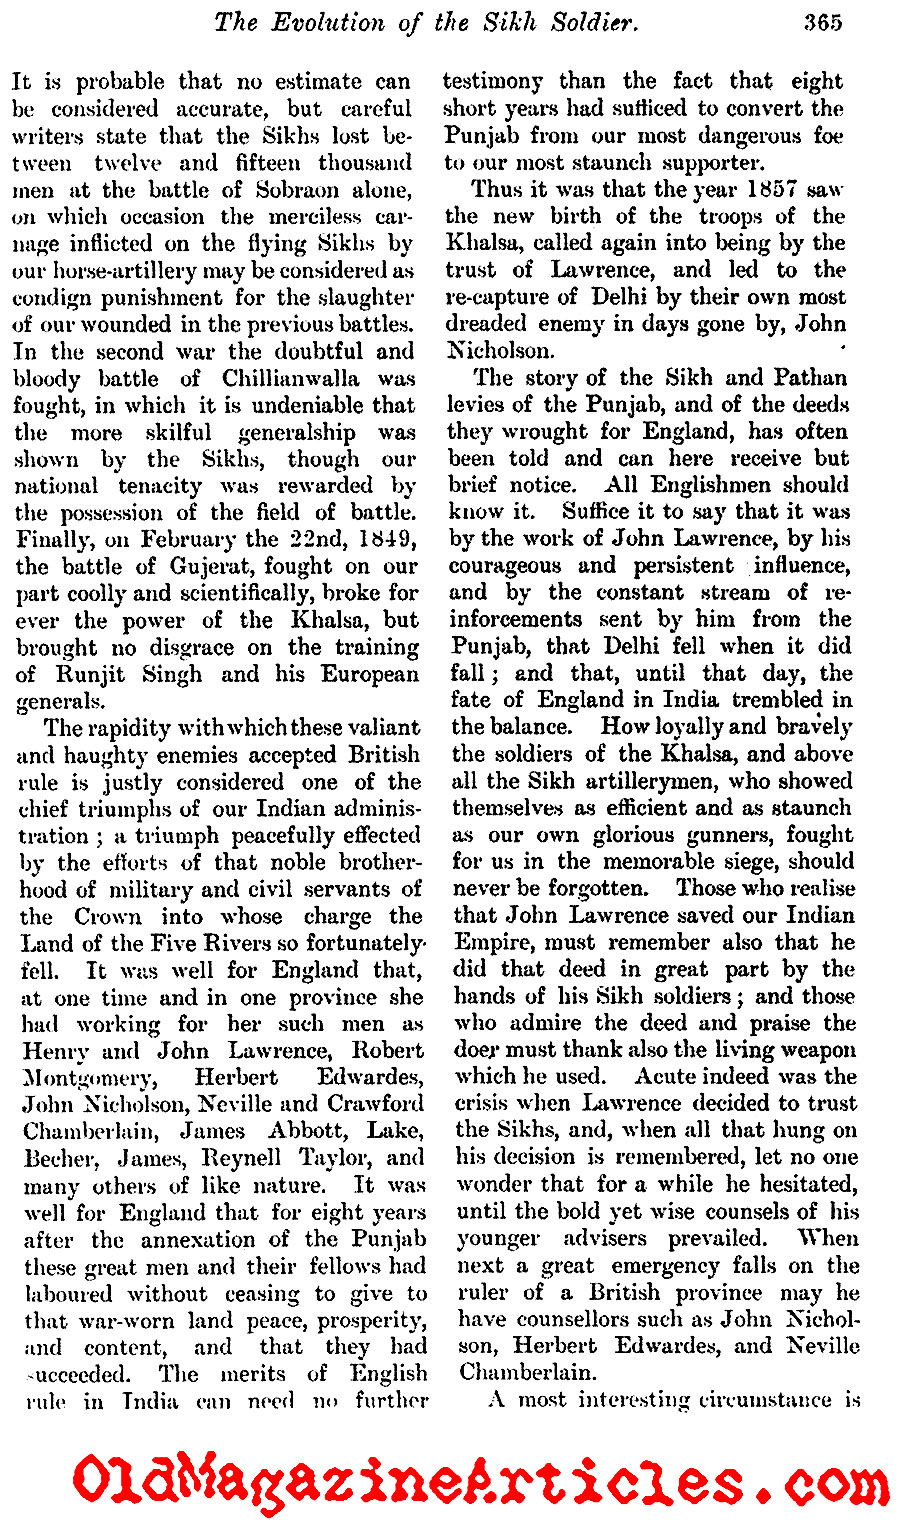 The Evolution of the Sikh Military  (The MacMillan's Magazine, 1898)